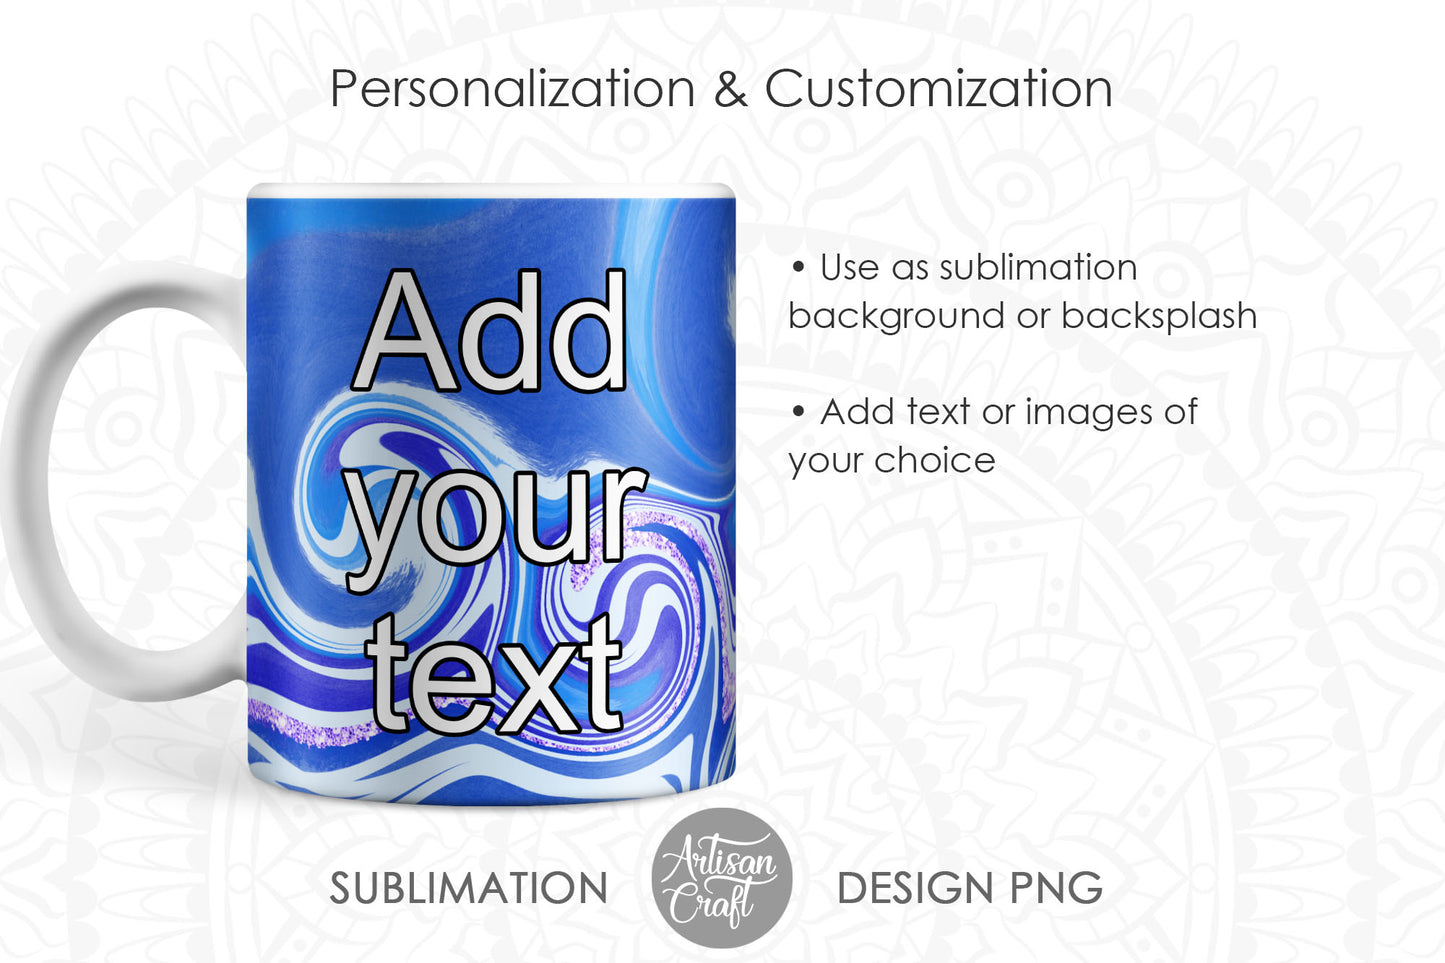 Mug designs PNG for sublimation with blue swirl marble